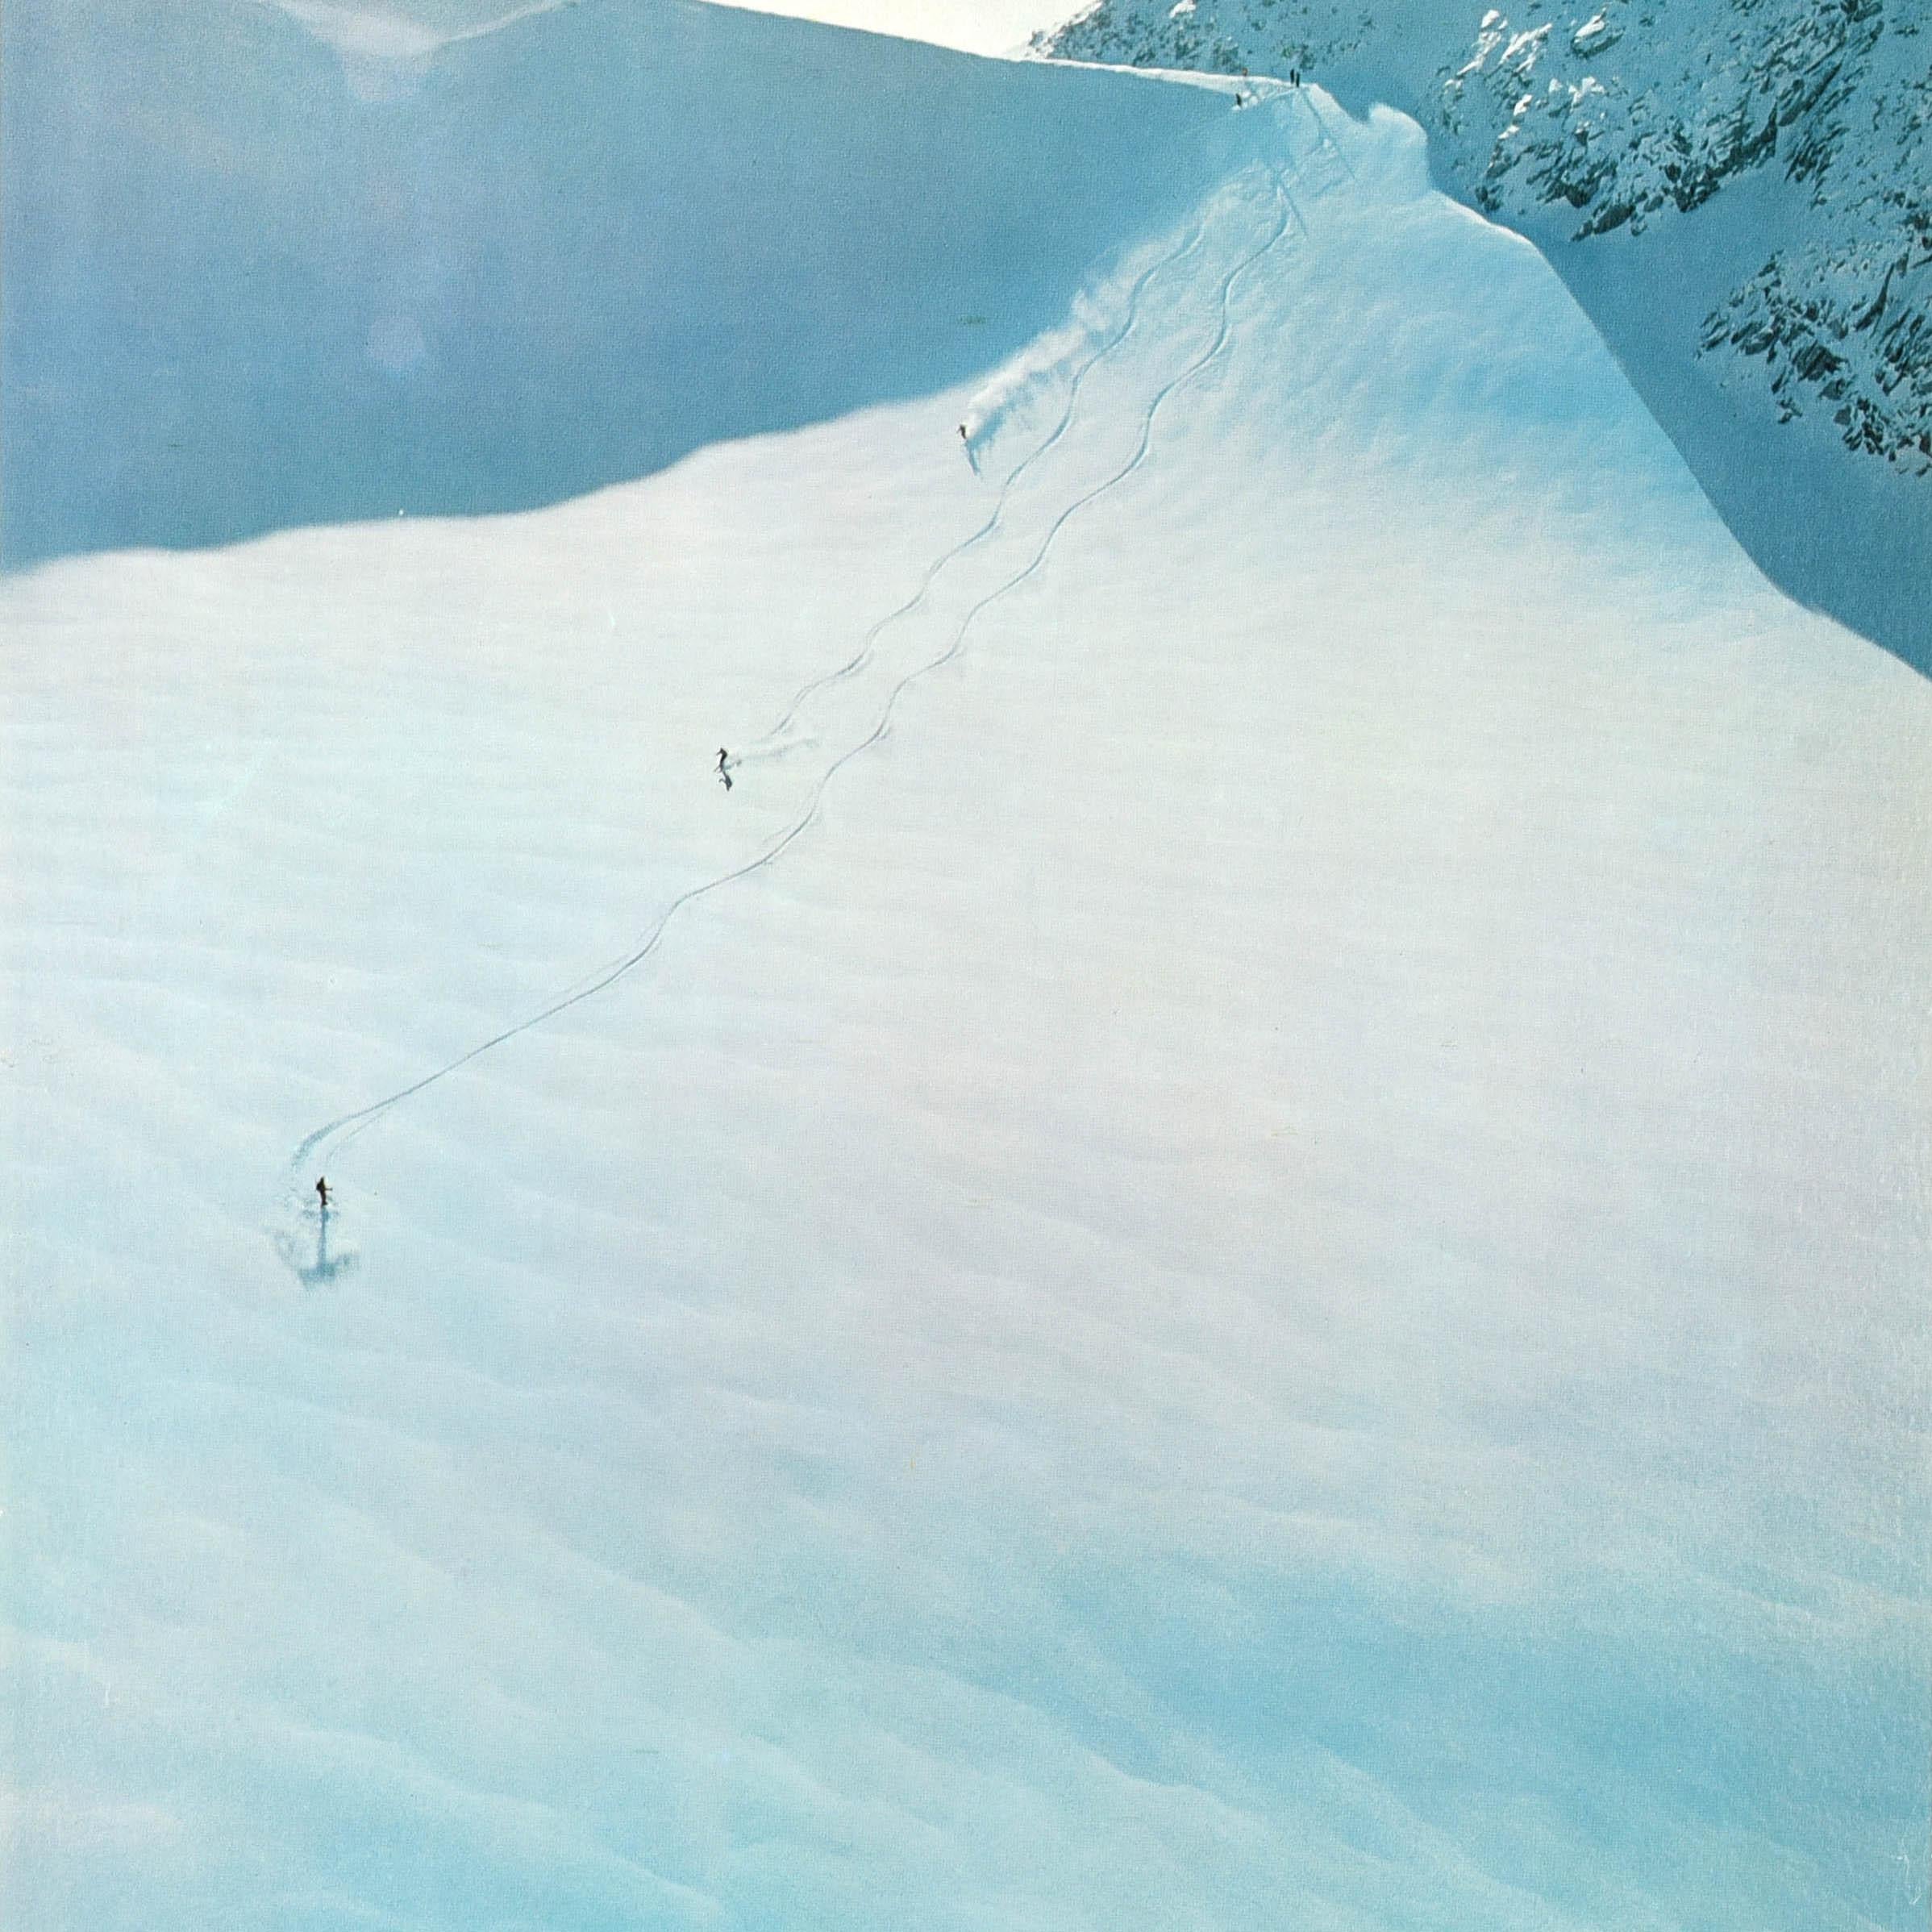 Original Vintage Travel Poster Canada Ski Slope Winter Sports Mountain Skiing In Good Condition For Sale In London, GB